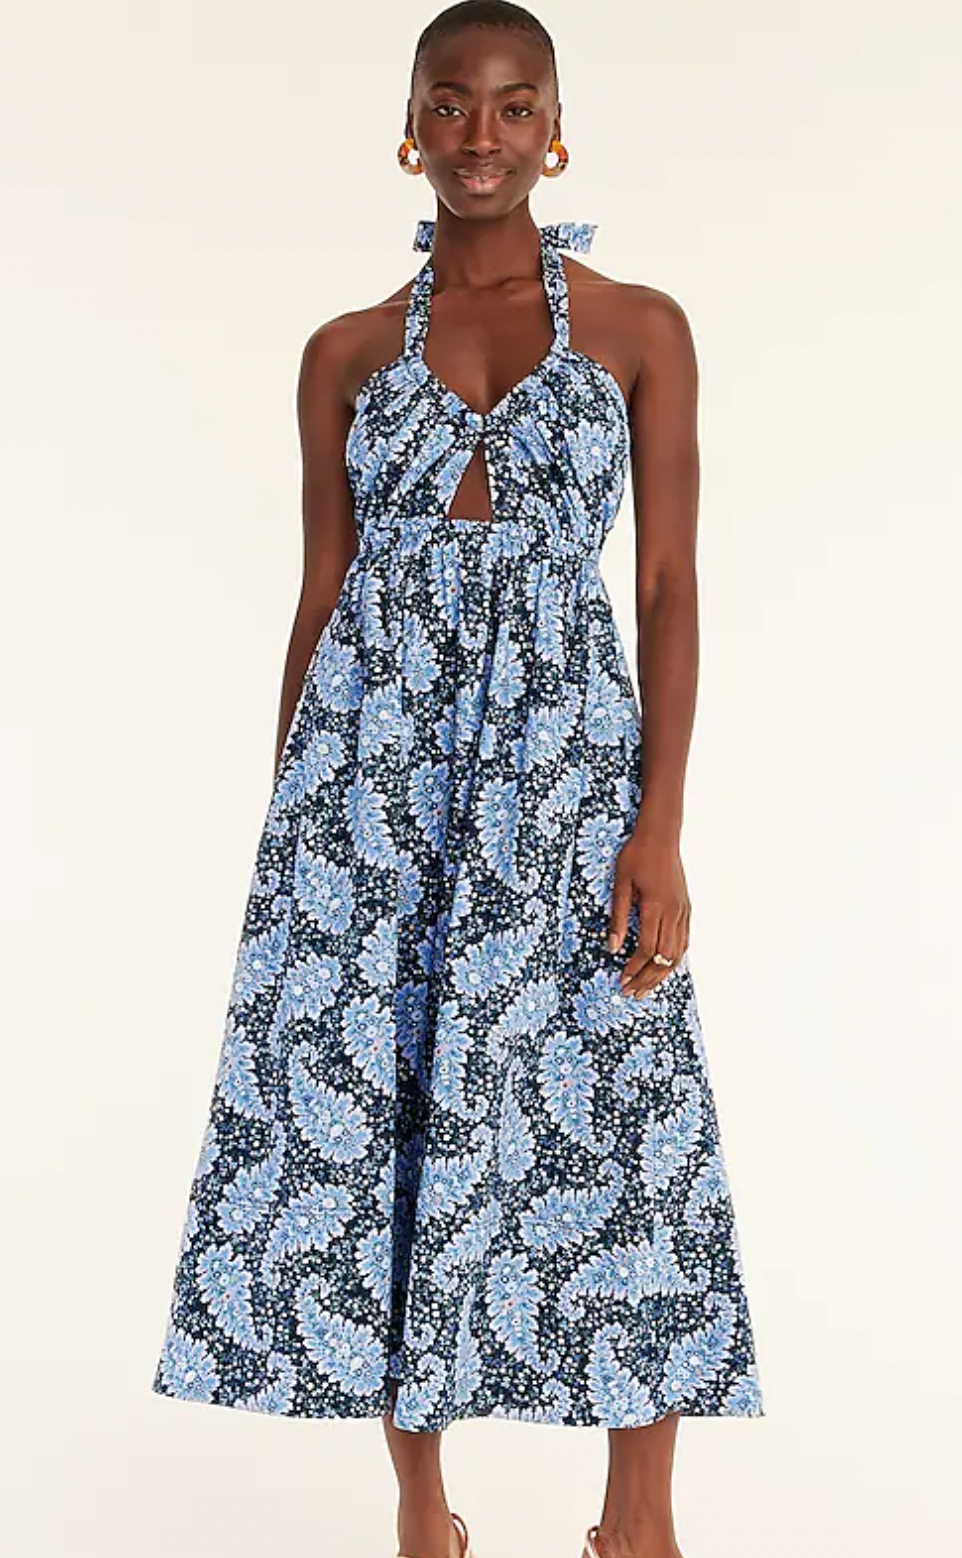 J.Crew Collection Halter Cutout Dress in Ratti Pacific Paisley